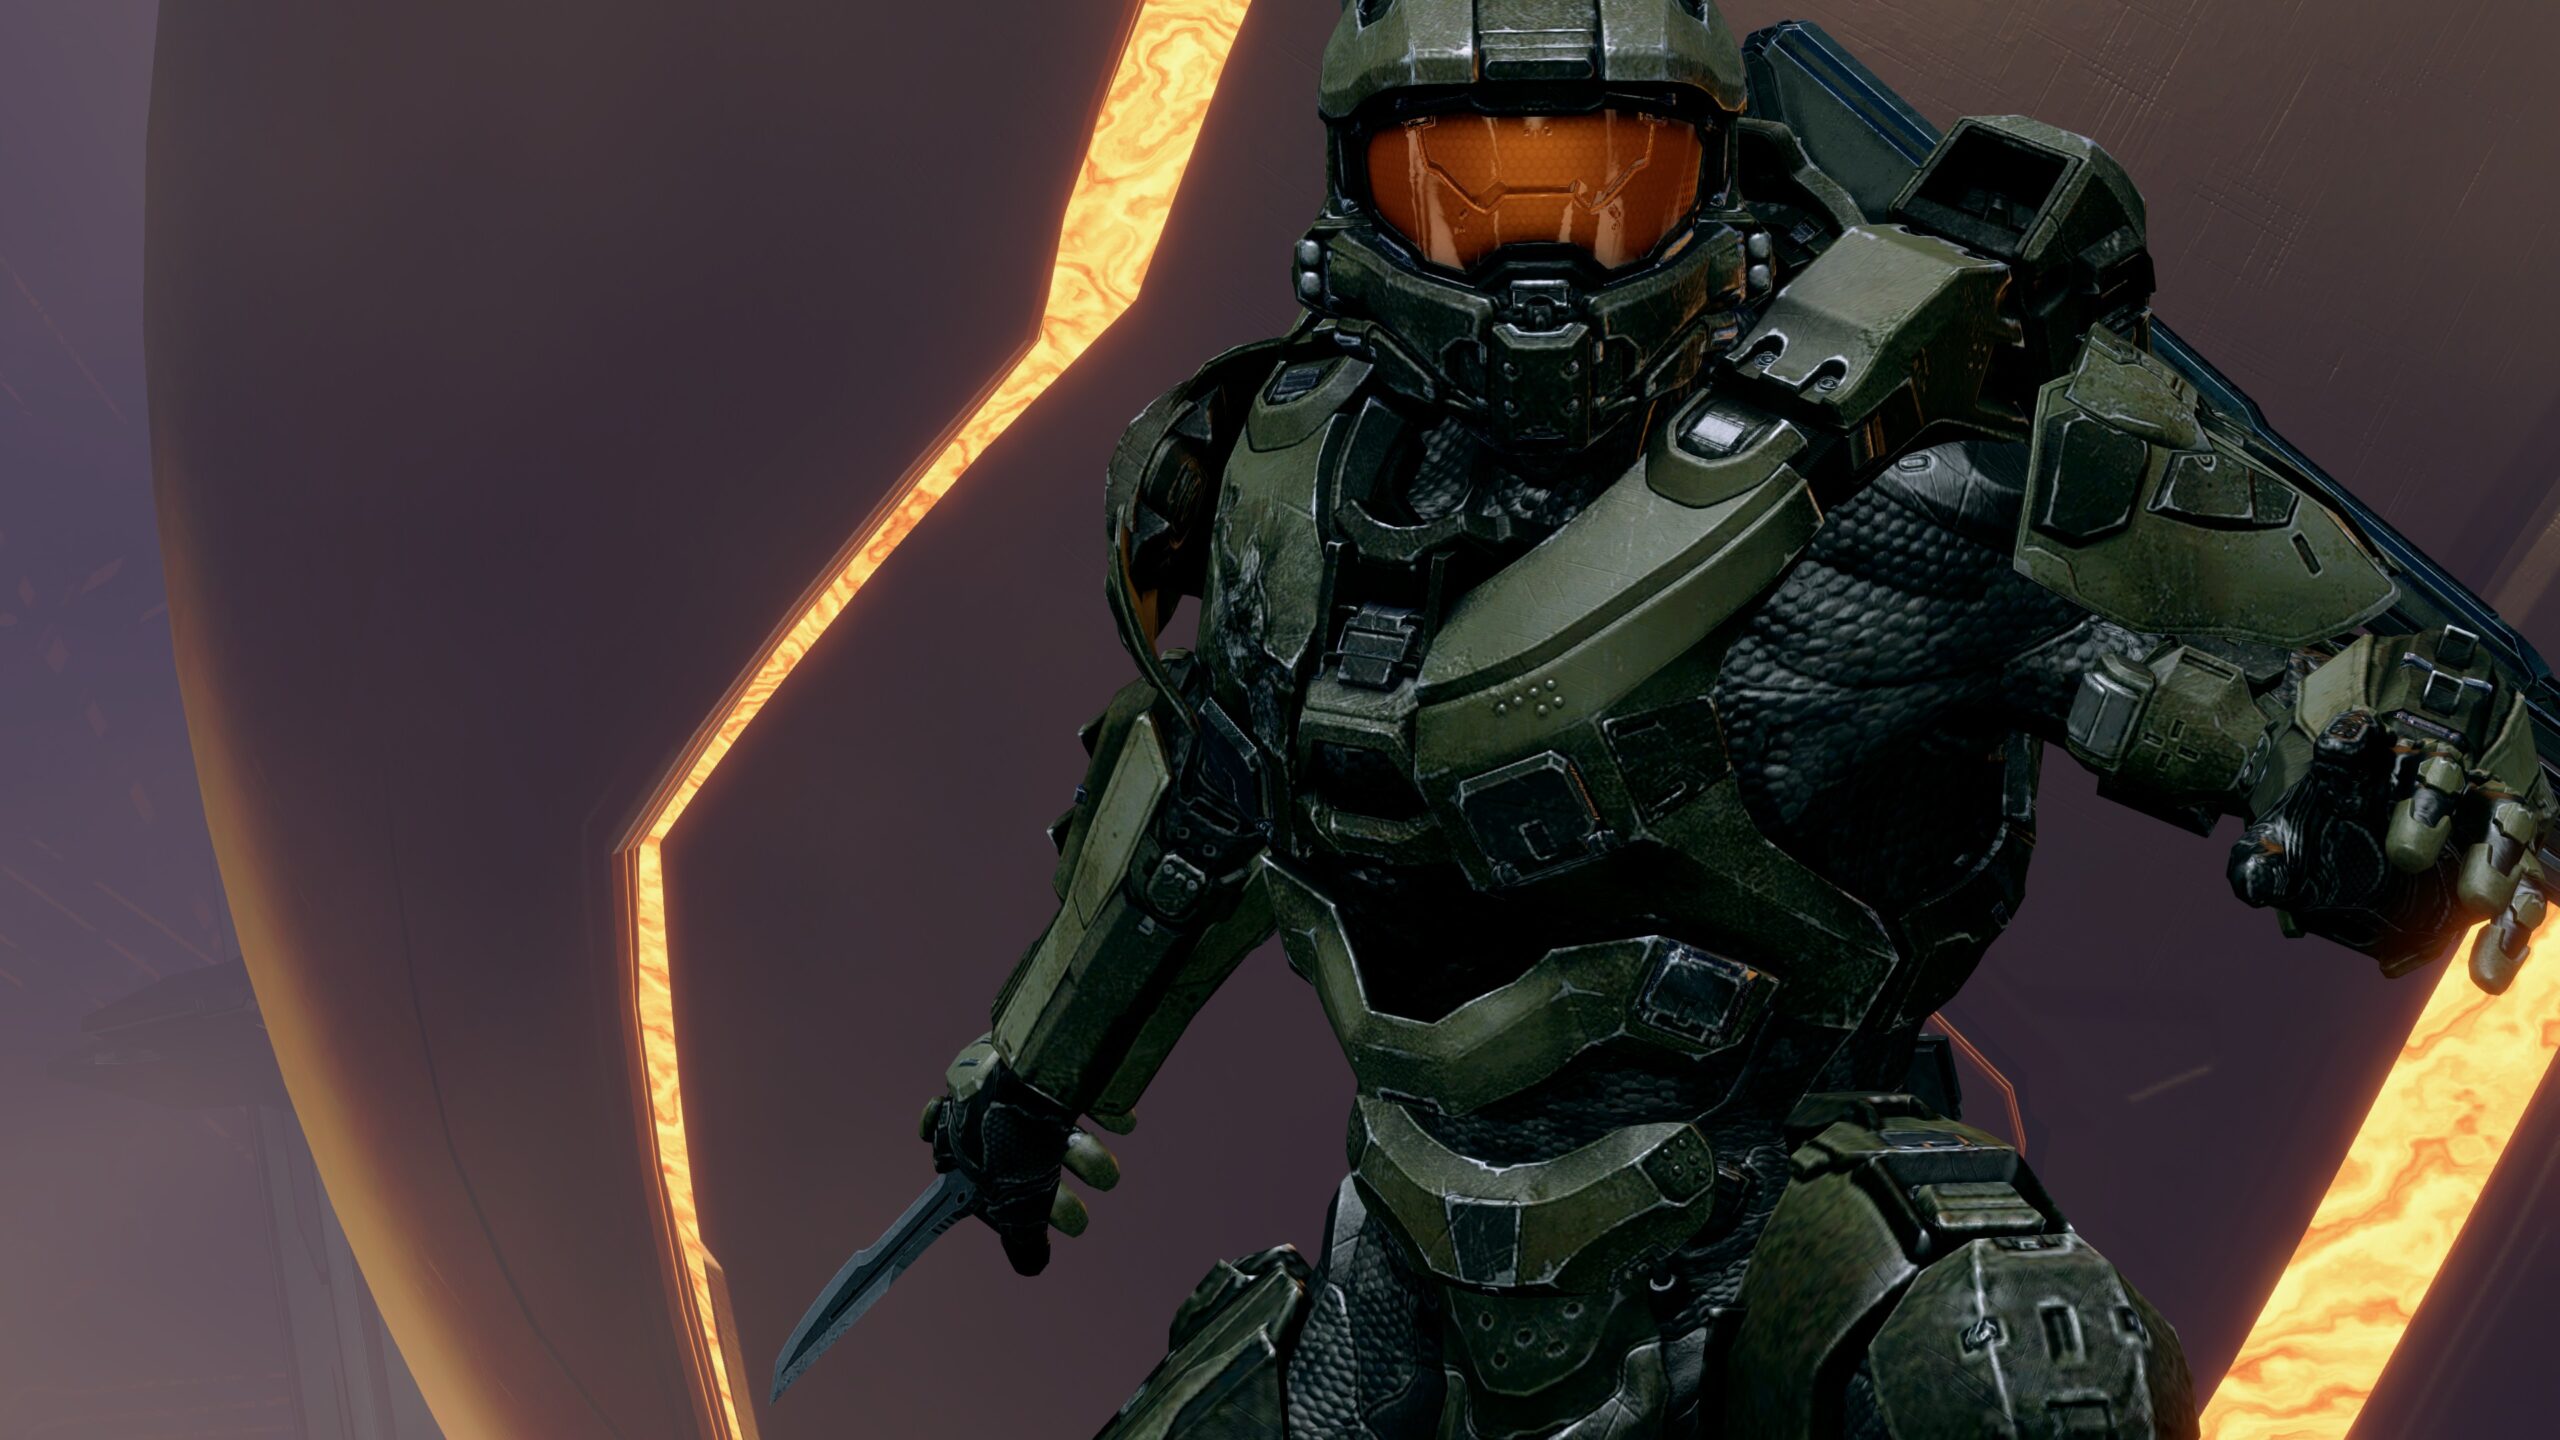 Halo 4 in-game screenshot of the Master Chief in front of the Didact's Cryptum